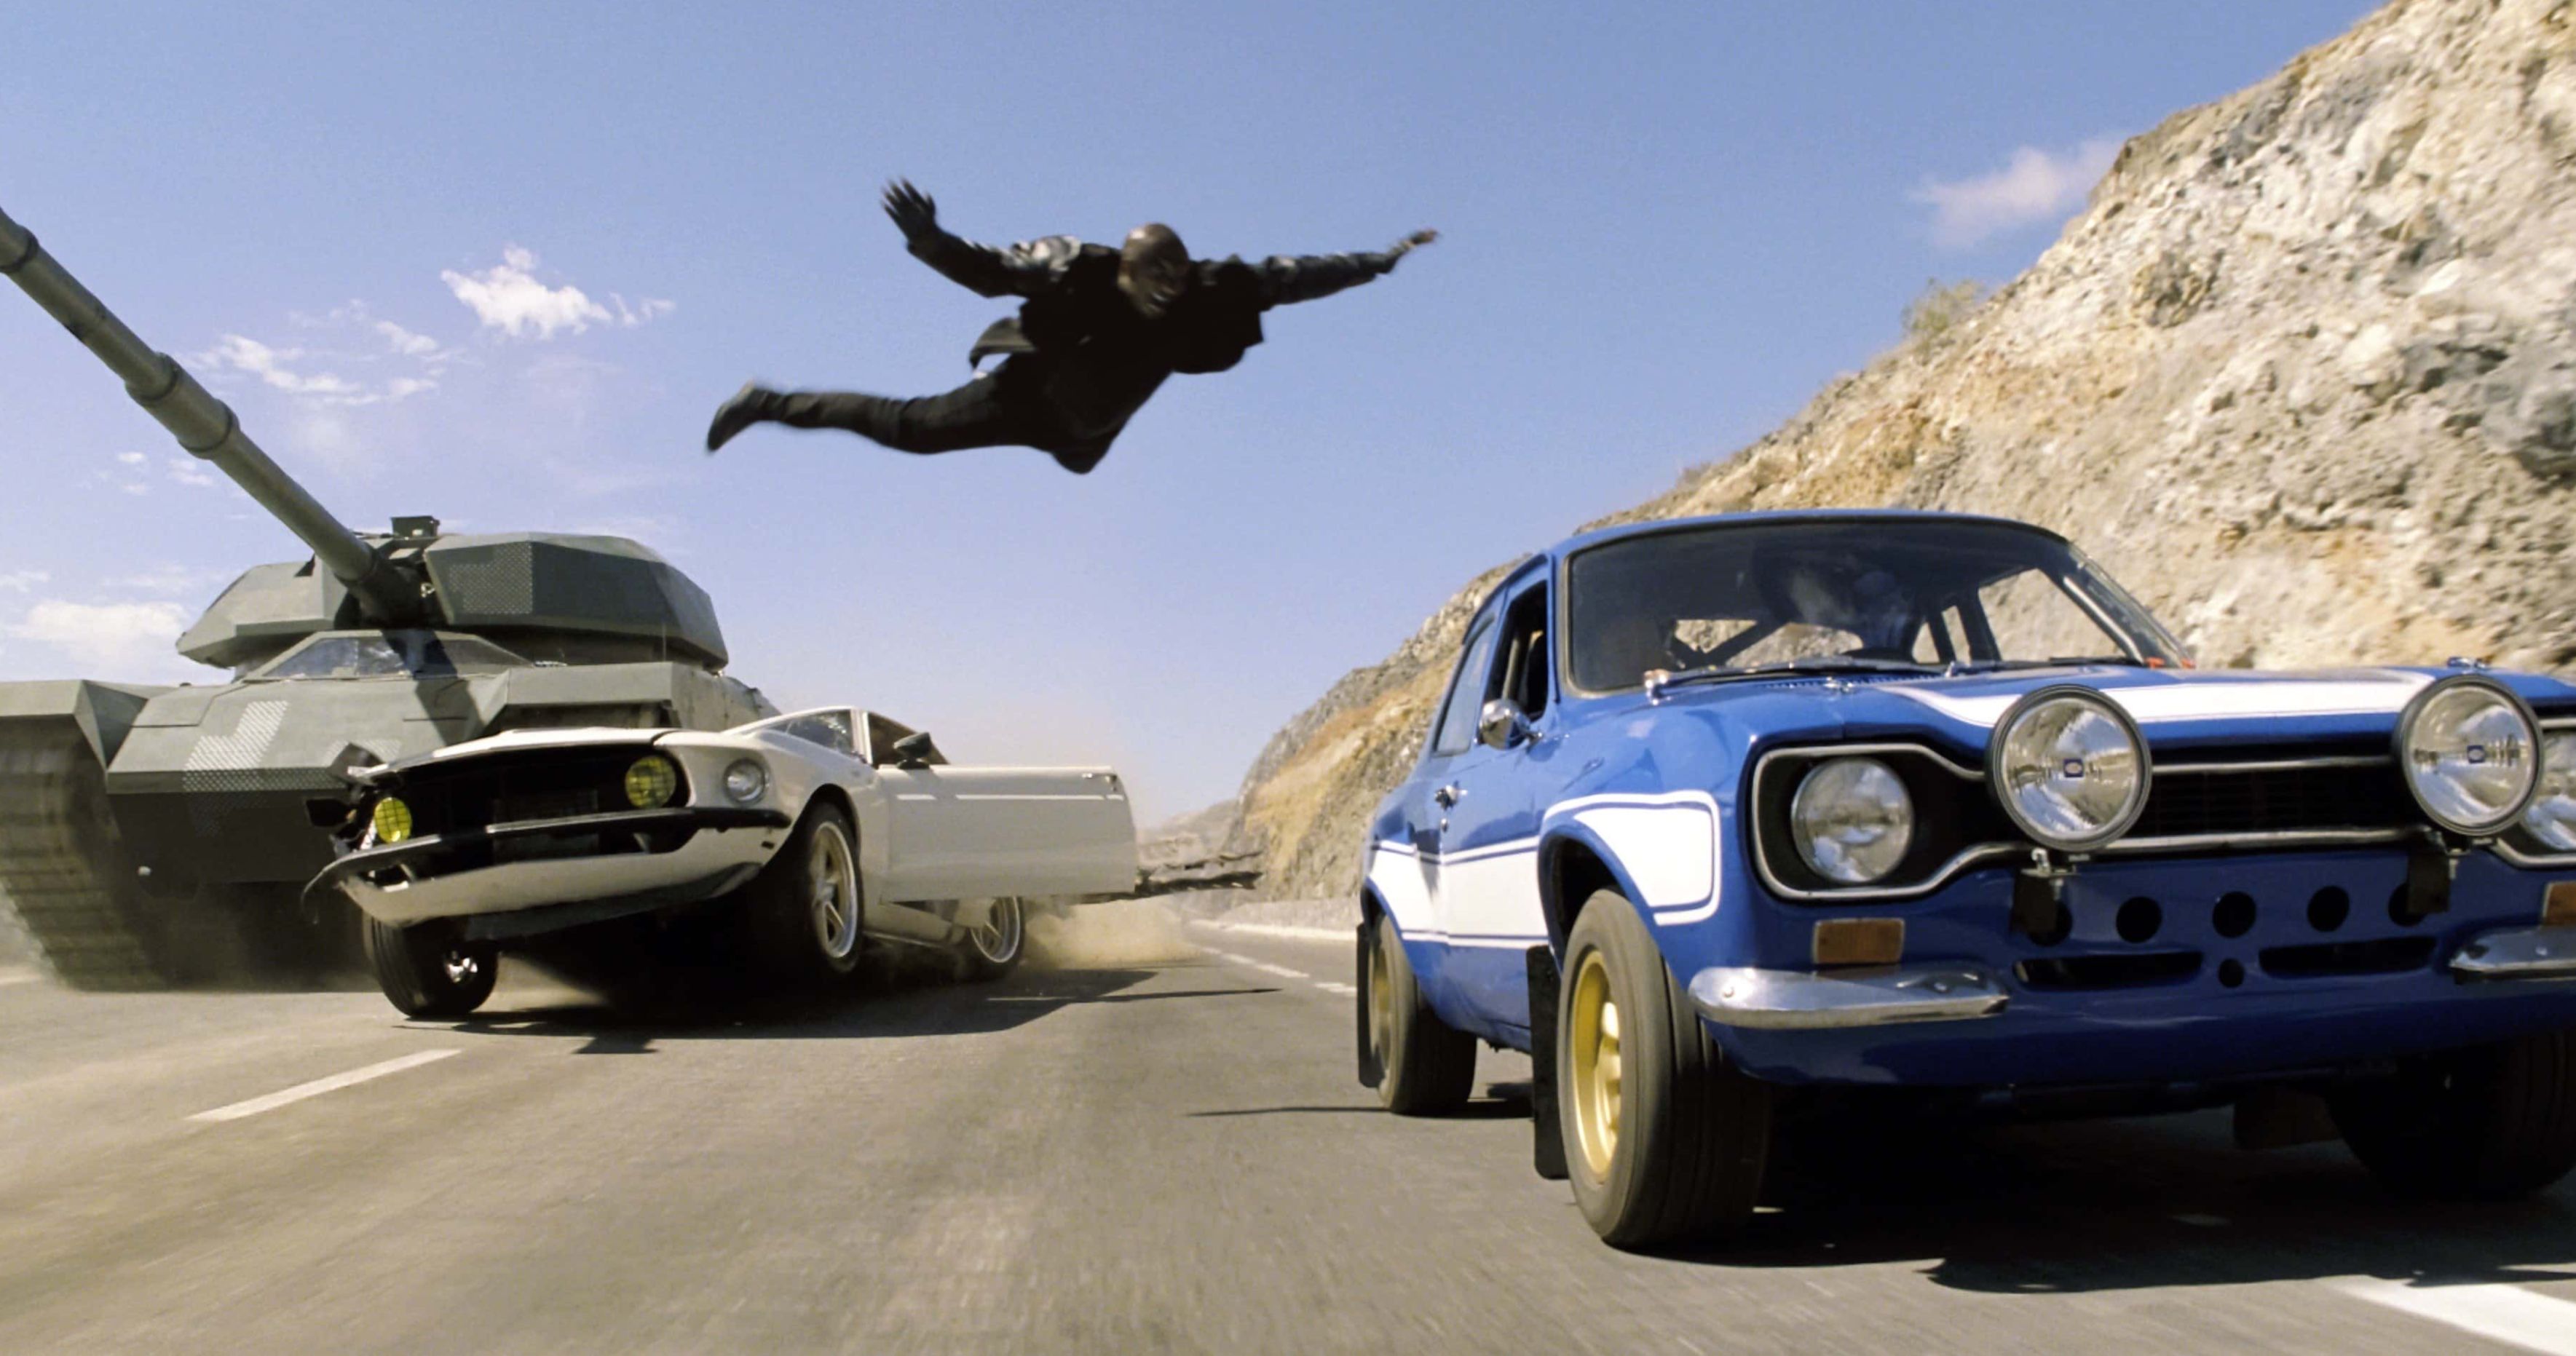 Fast & Furious Filmmakers Hit With $1 Million Fine After Stuntman Left Brain Damaged in On-Set Accident.